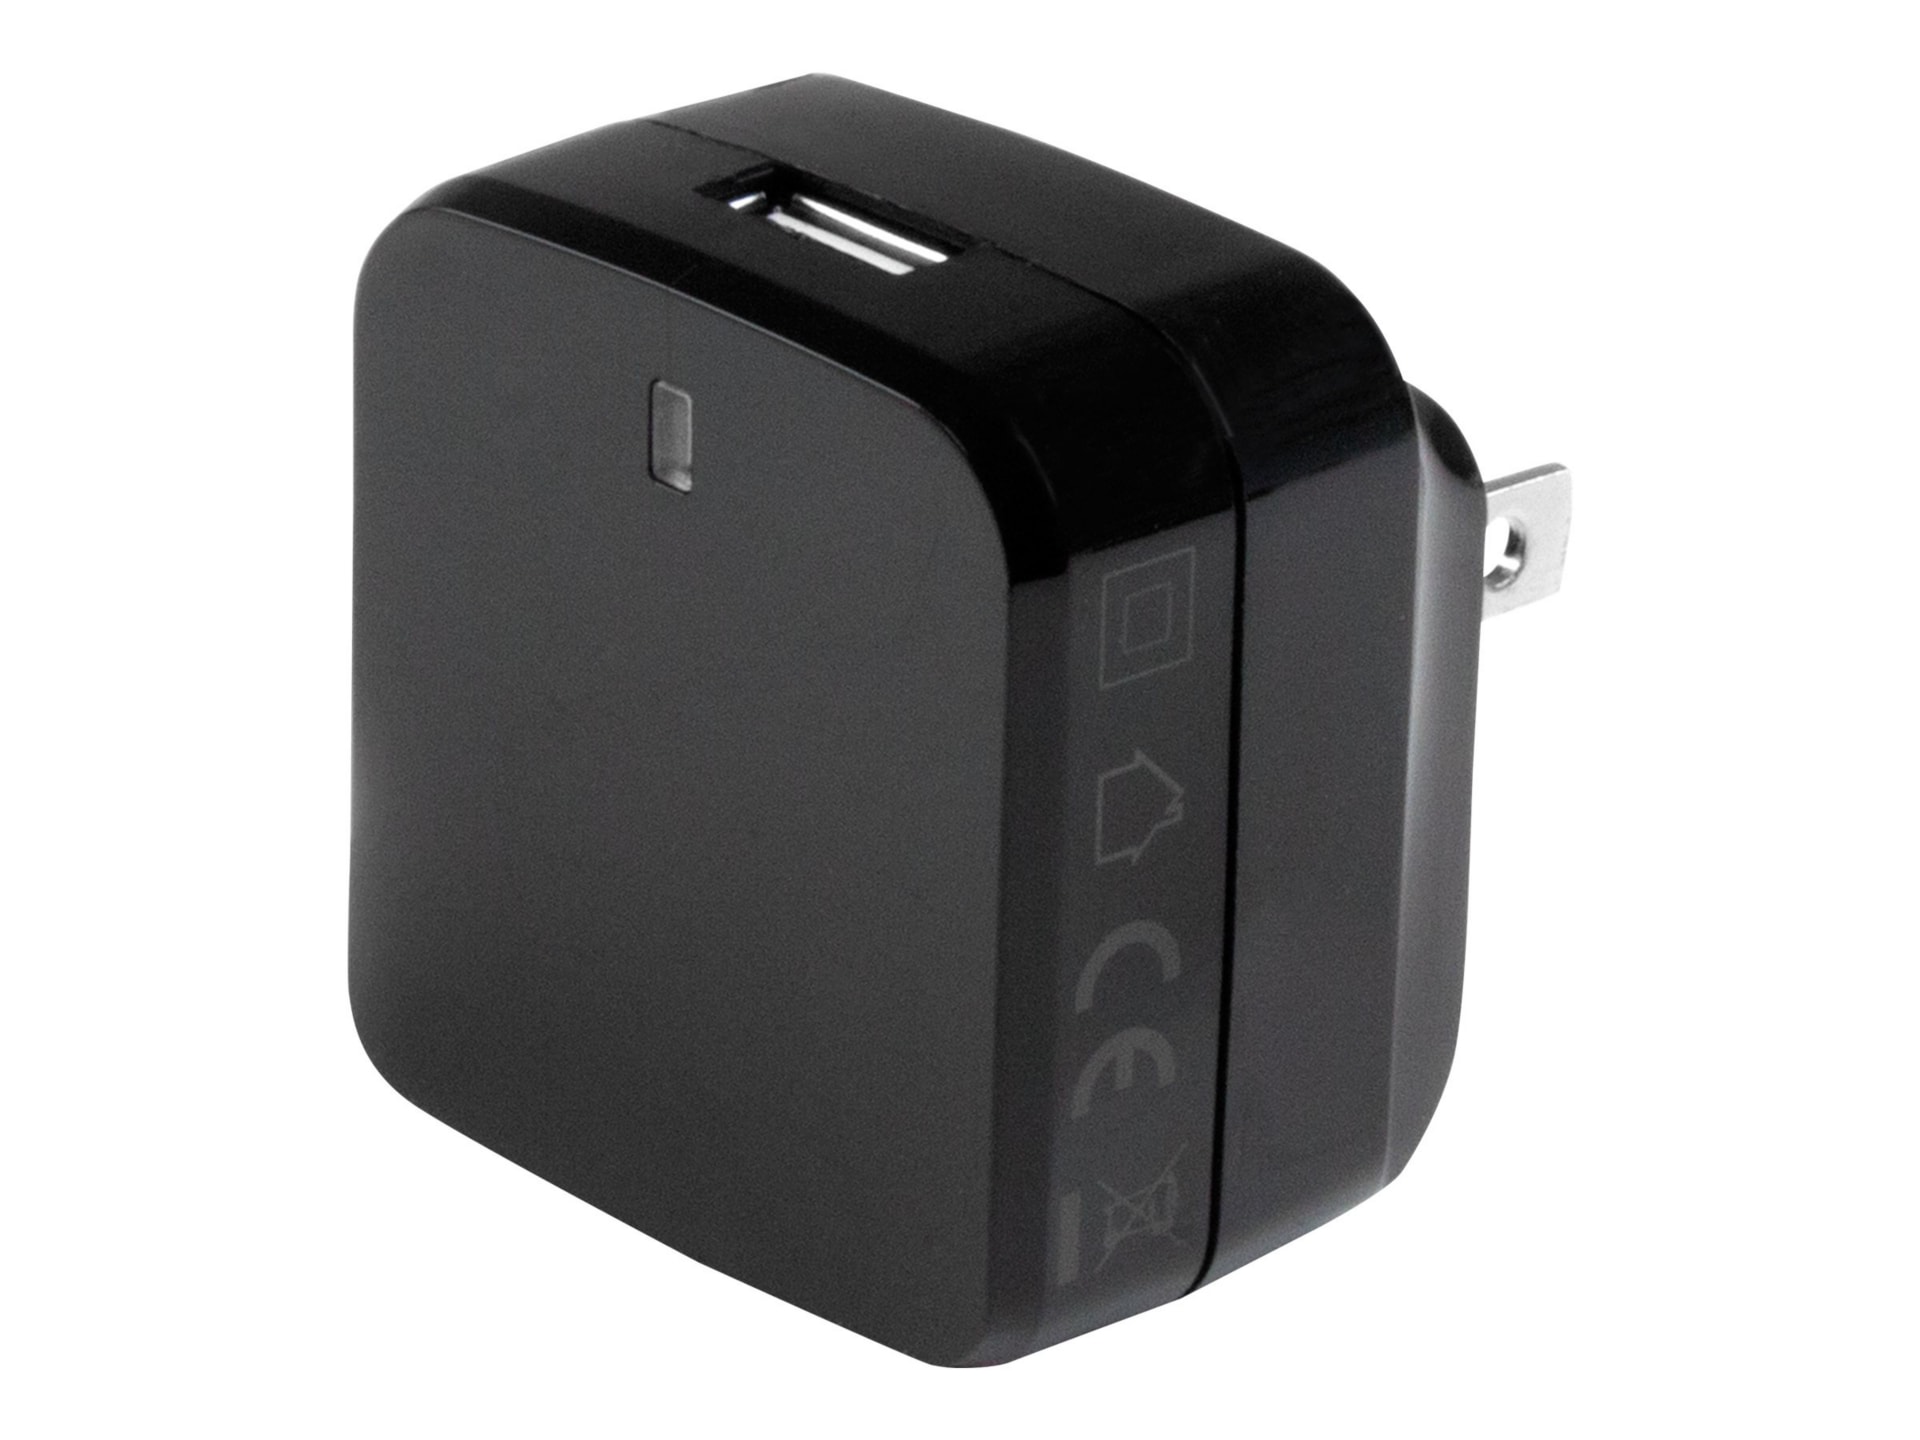 StarTech.com Black USB Wall Charger - Quick Charge 2.0 - 110V/220V Charger